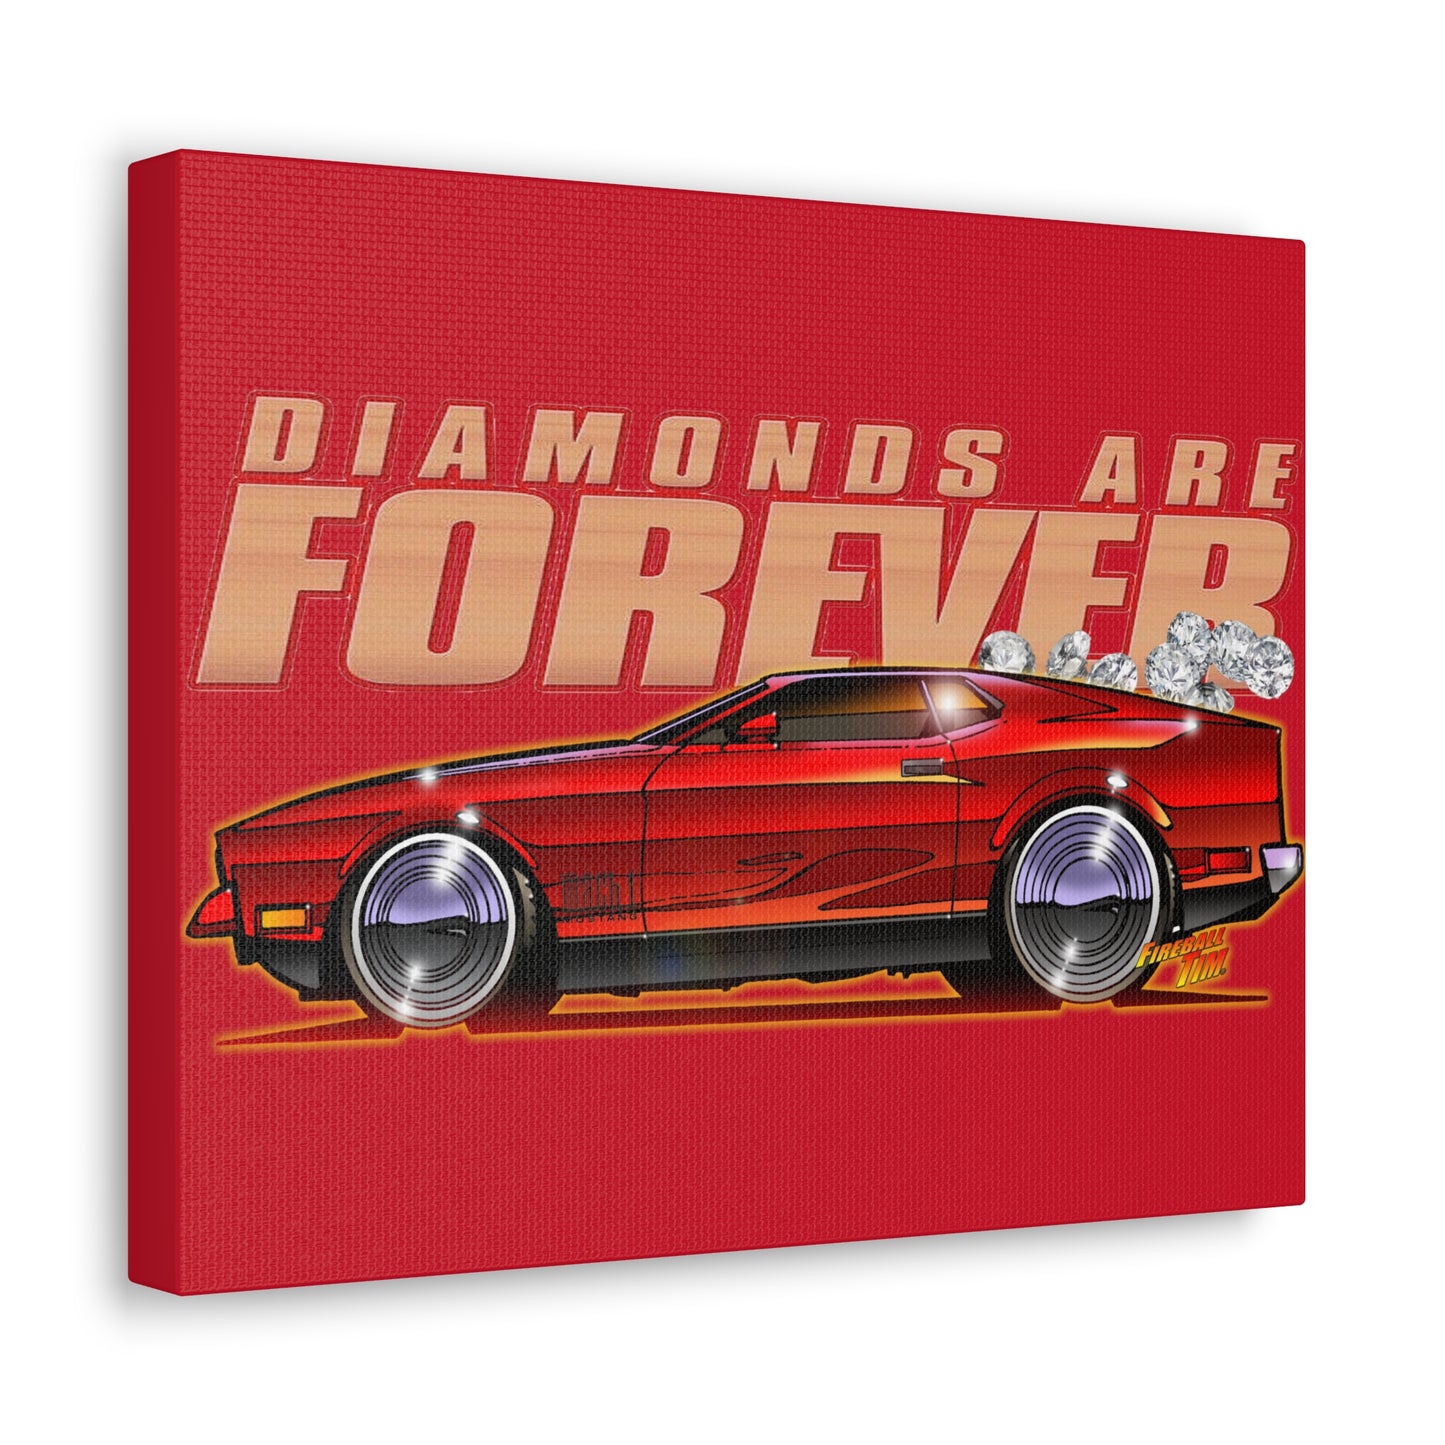 James Bond DIAMONDS ARE FOREVER 1971 Mustang Mach 1 Canvas Gallery Art Print 11x14